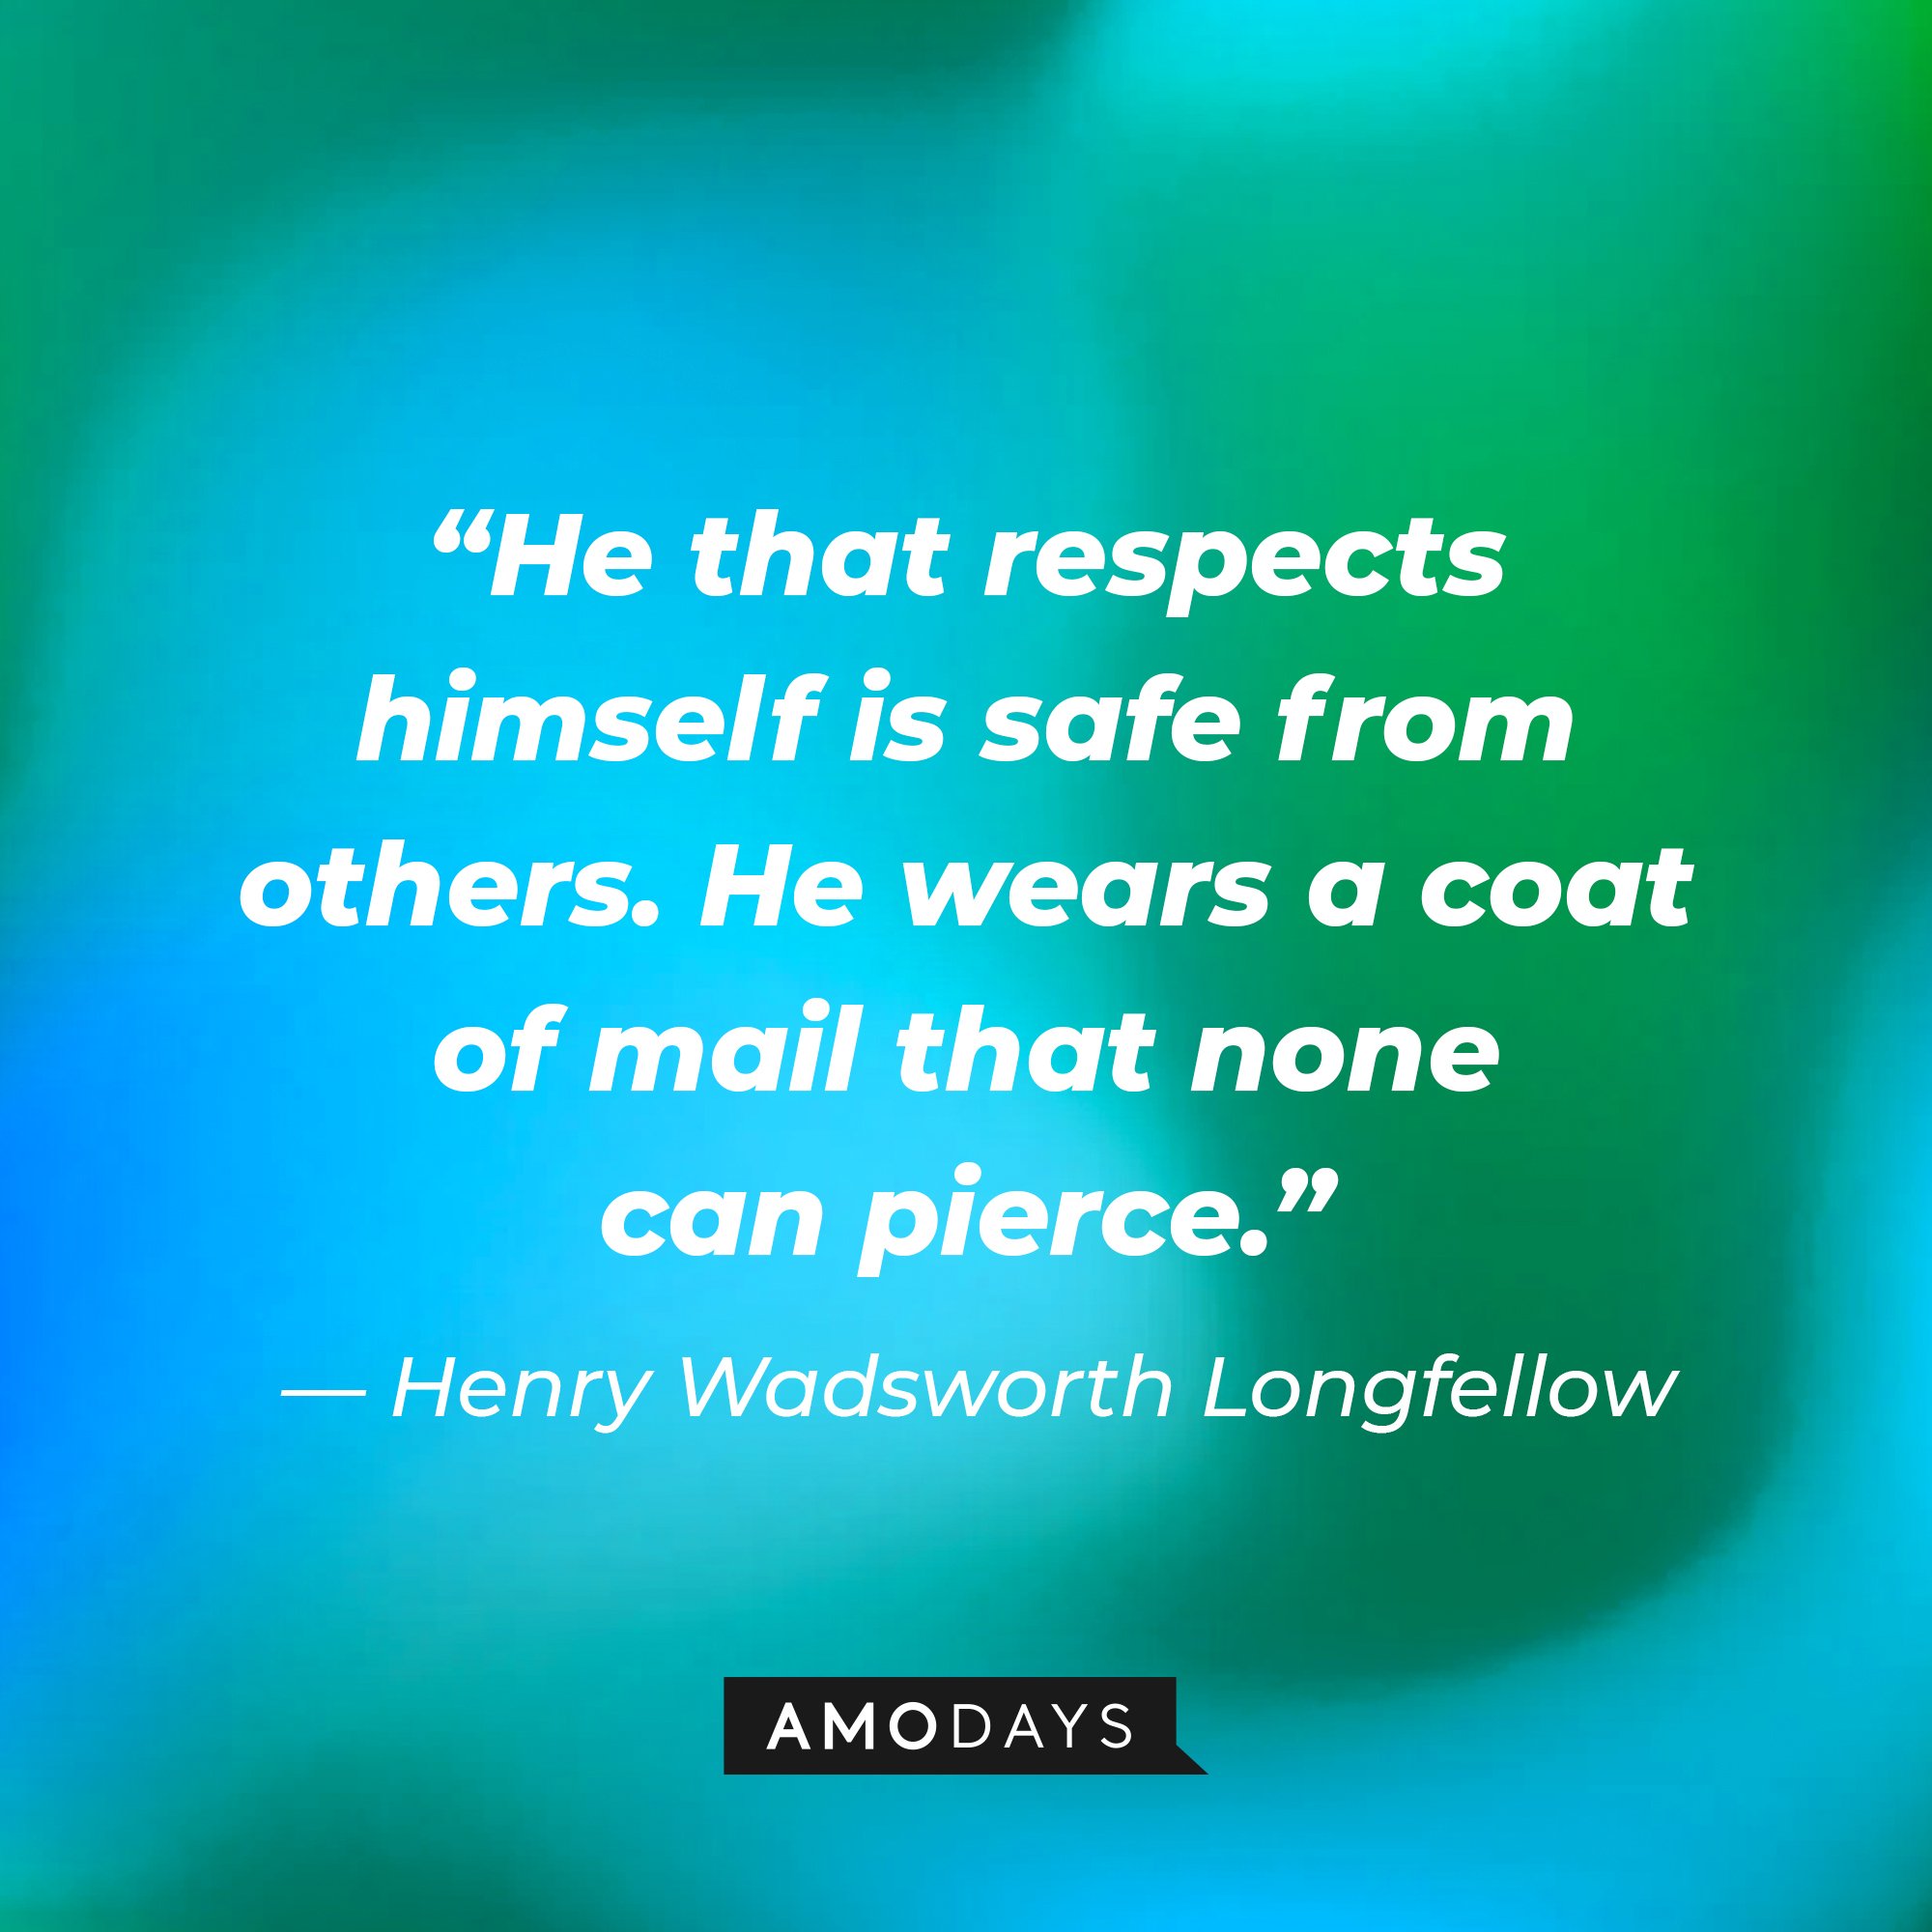 Henry Wadsworth Longfellow’s quote: “He that respects himself is safe from others. He wears a coat of mail that none can pierce.” | Image: AmoDays